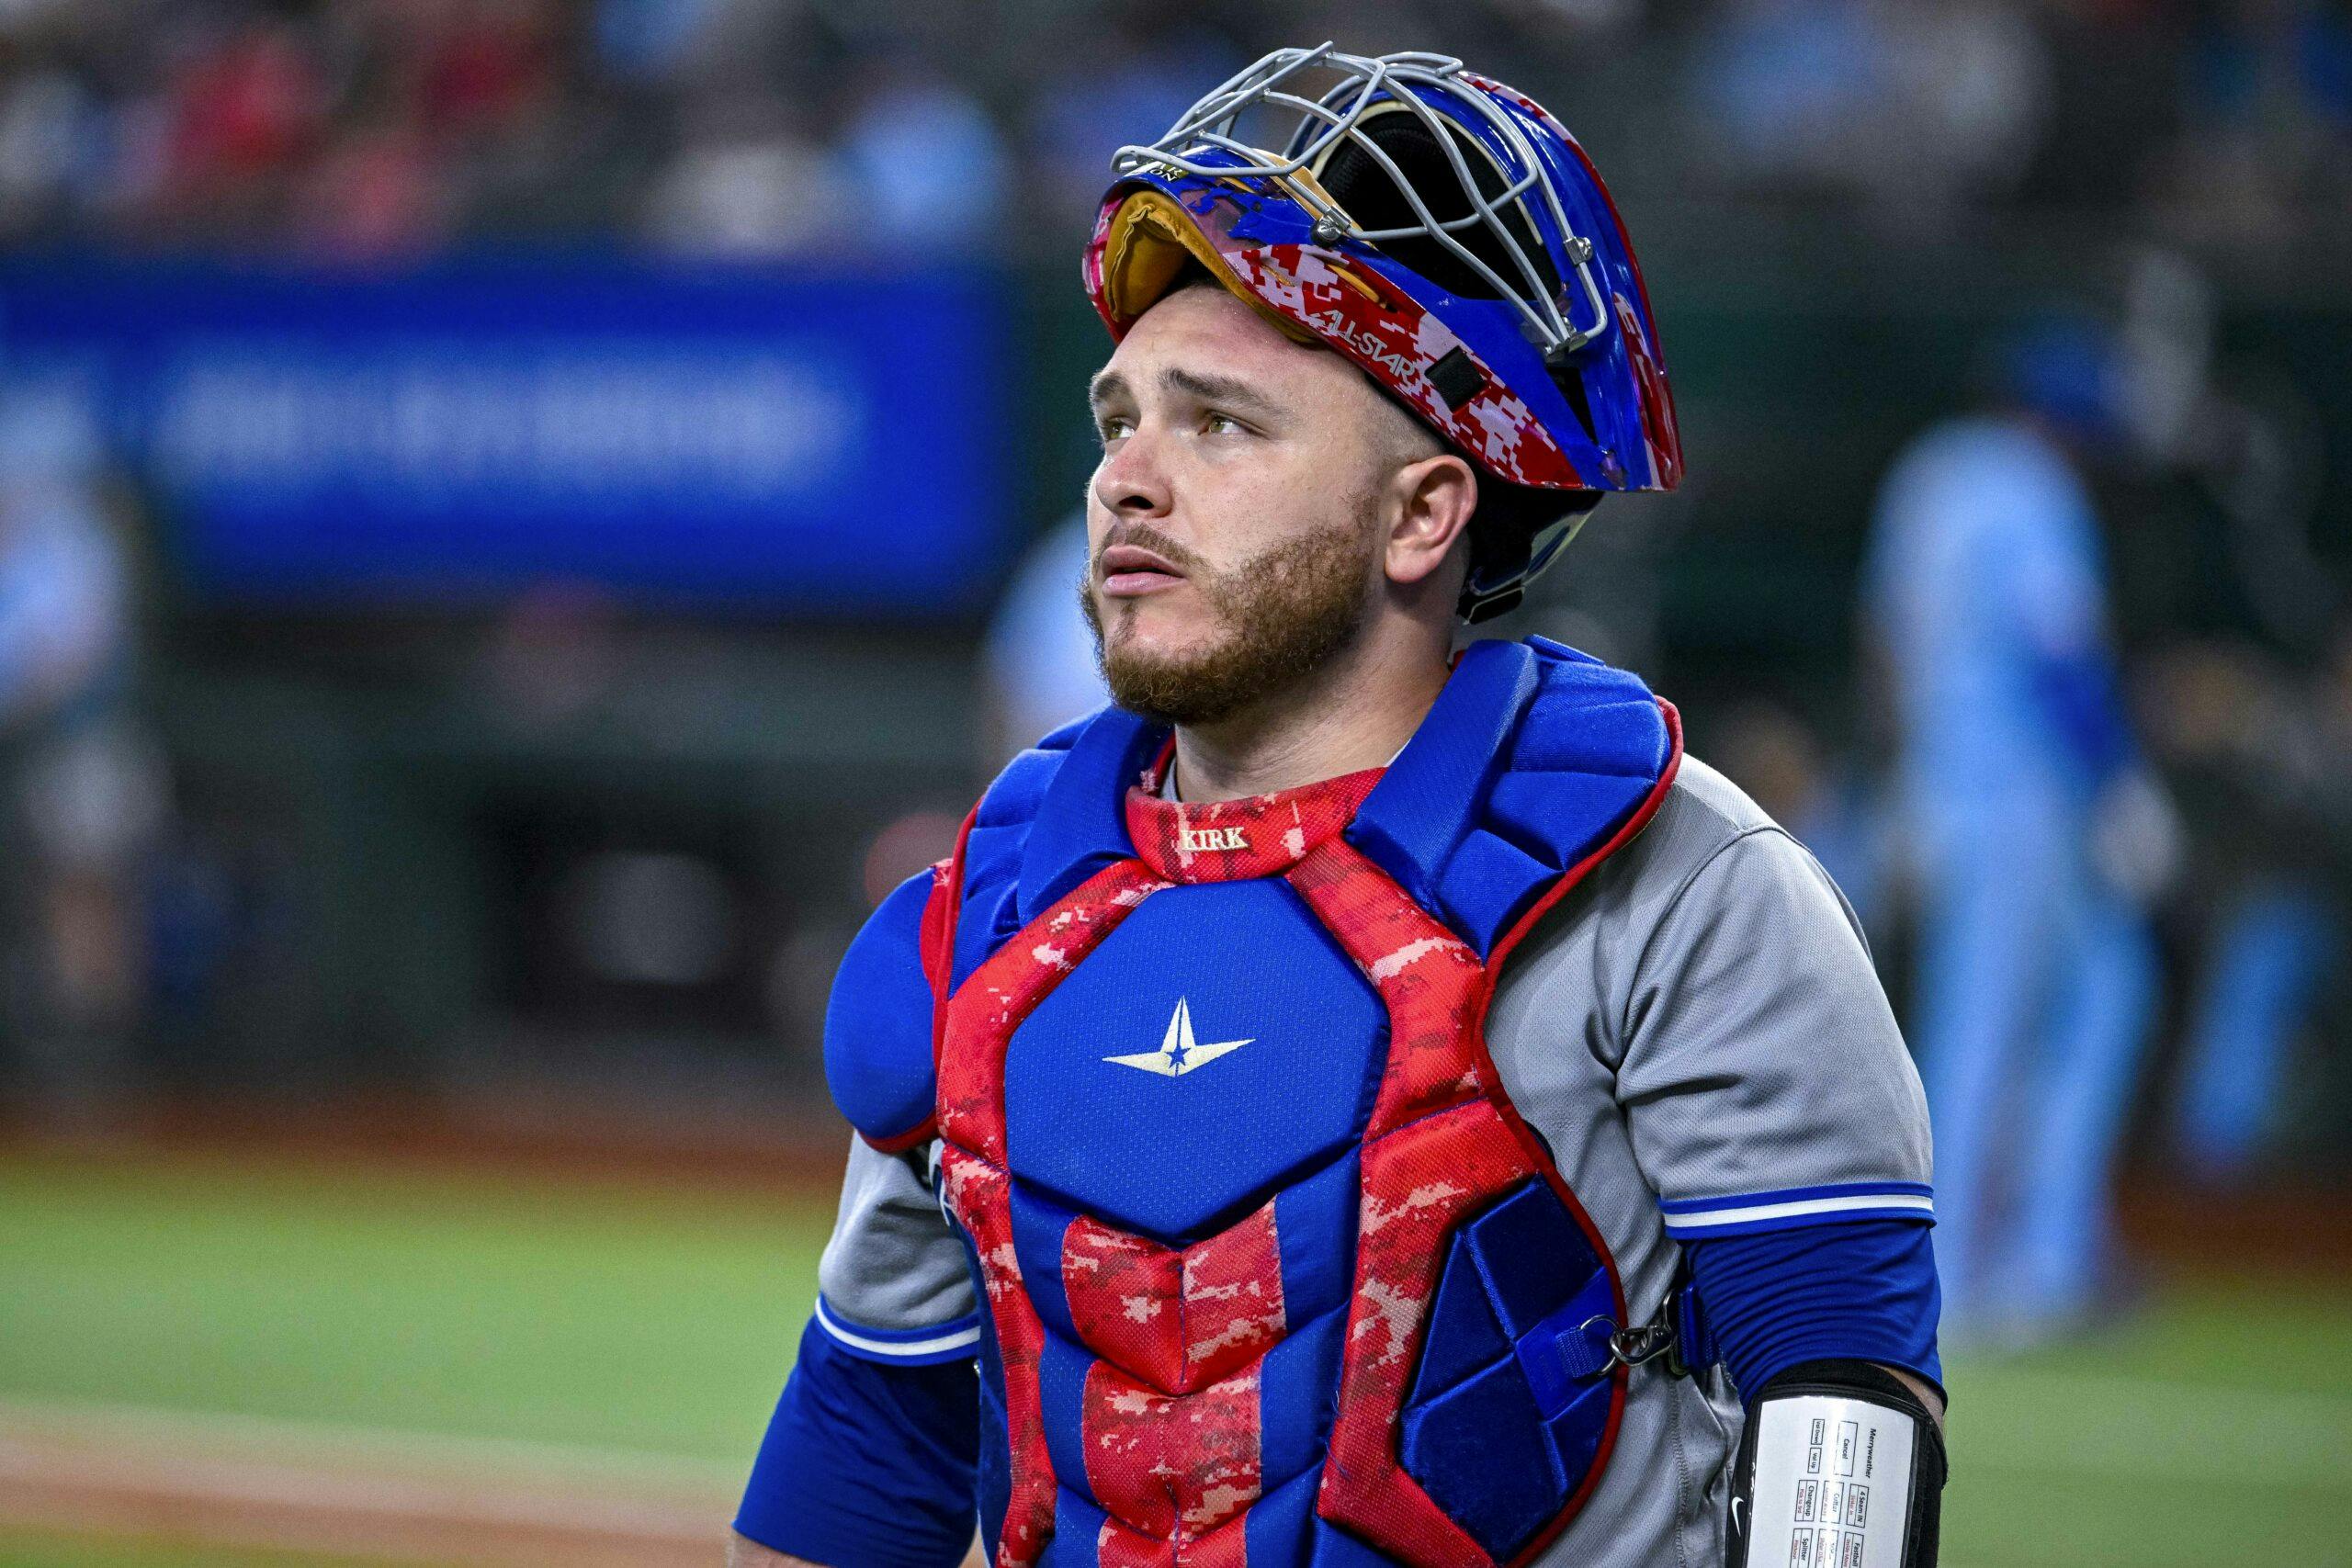 Alejandro Kirk - MLB Catcher - News, Stats, Bio and more - The